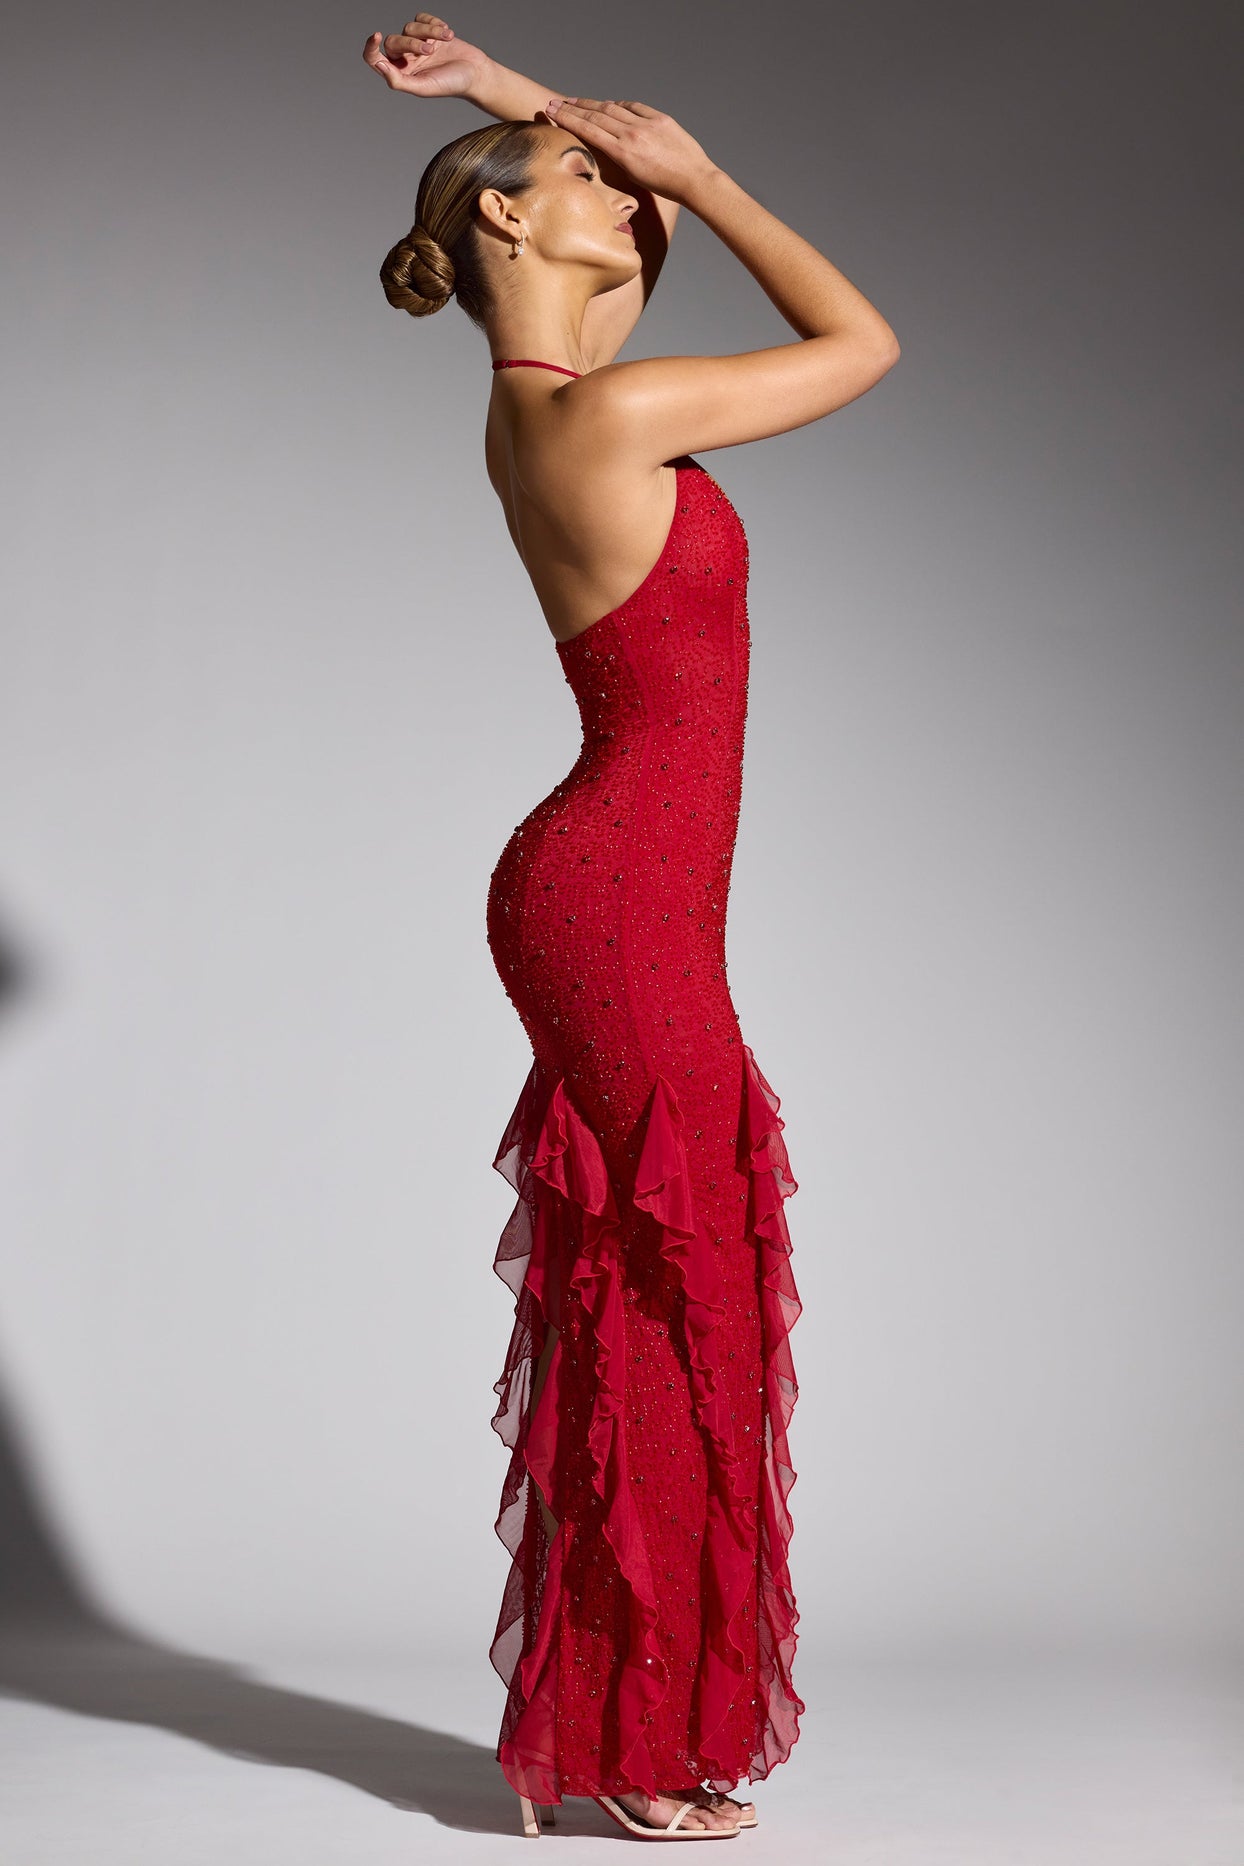 Embellished Halter Neck Ruffle Maxi Dress in Red